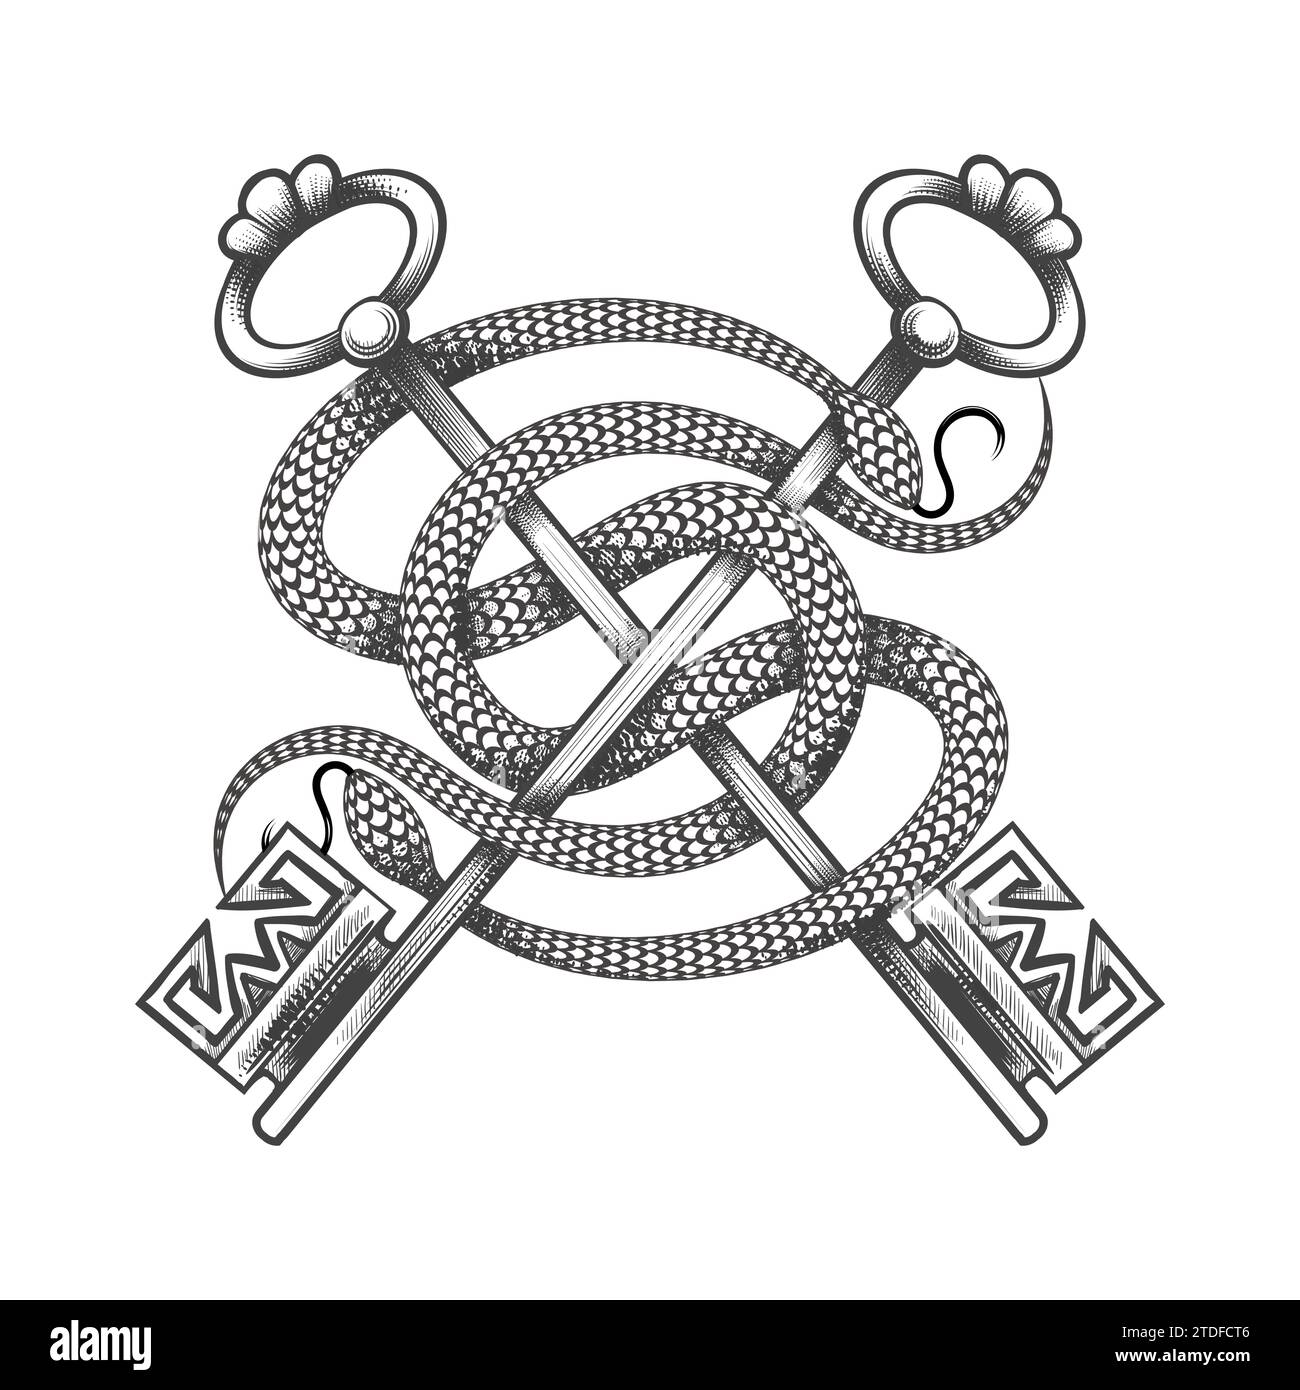 Snakes Wraps Around Vintage Keys Secret Knowledge Medieval Concept Tattoo in engraving style isolated on white background. No AI was used. Stock Vector